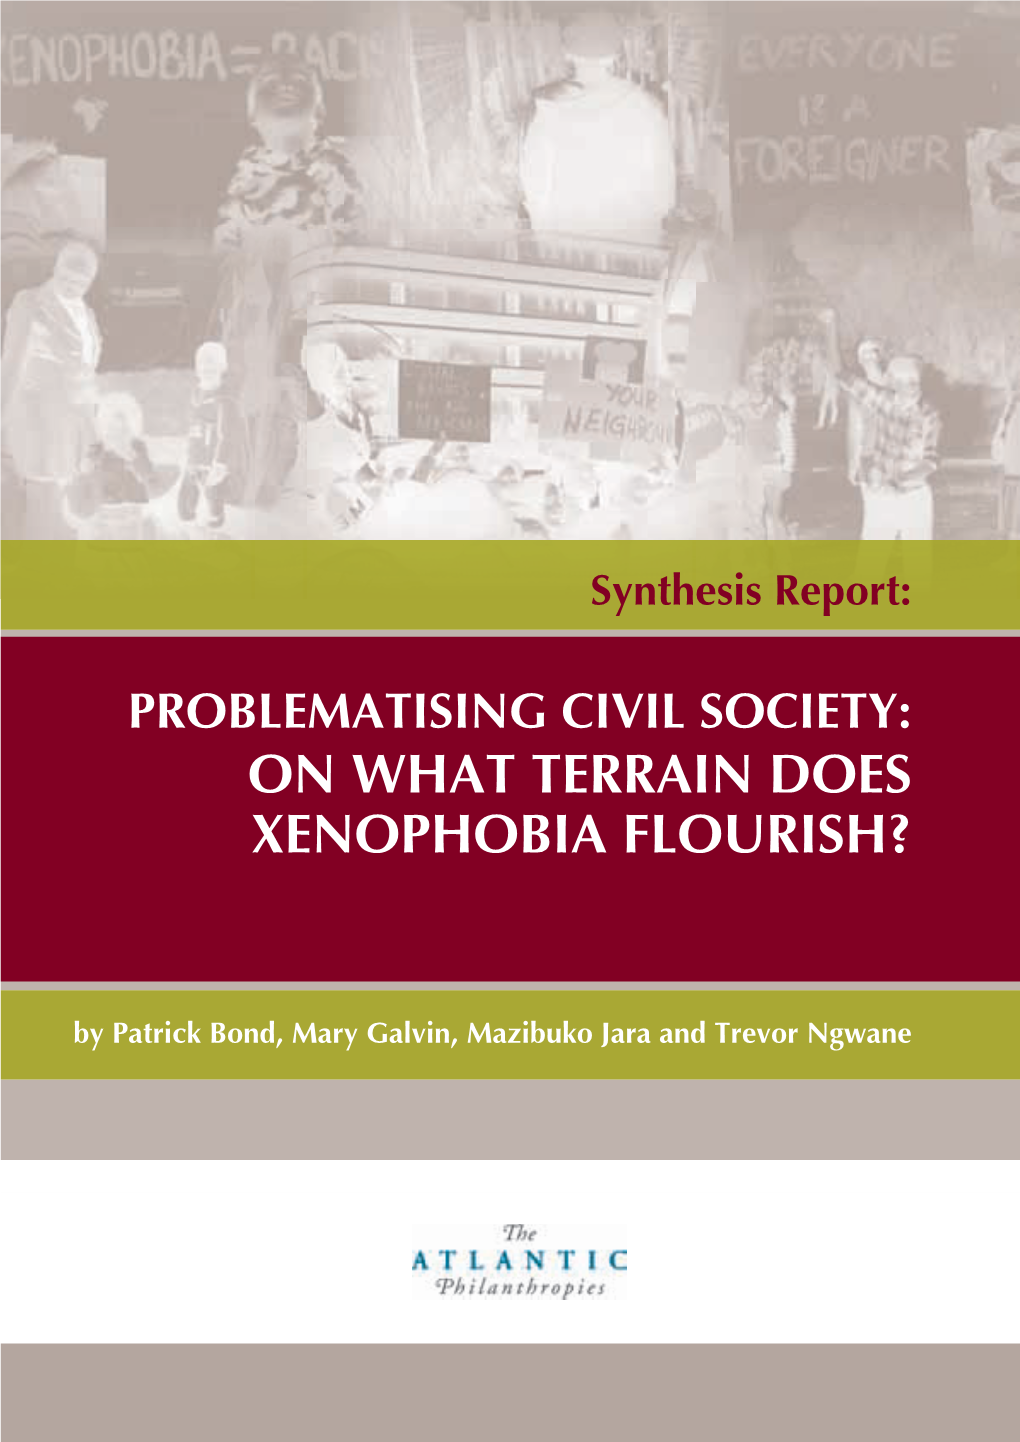 Problematising Civil Society: on What Terrain Does Xenophobia Flourish?